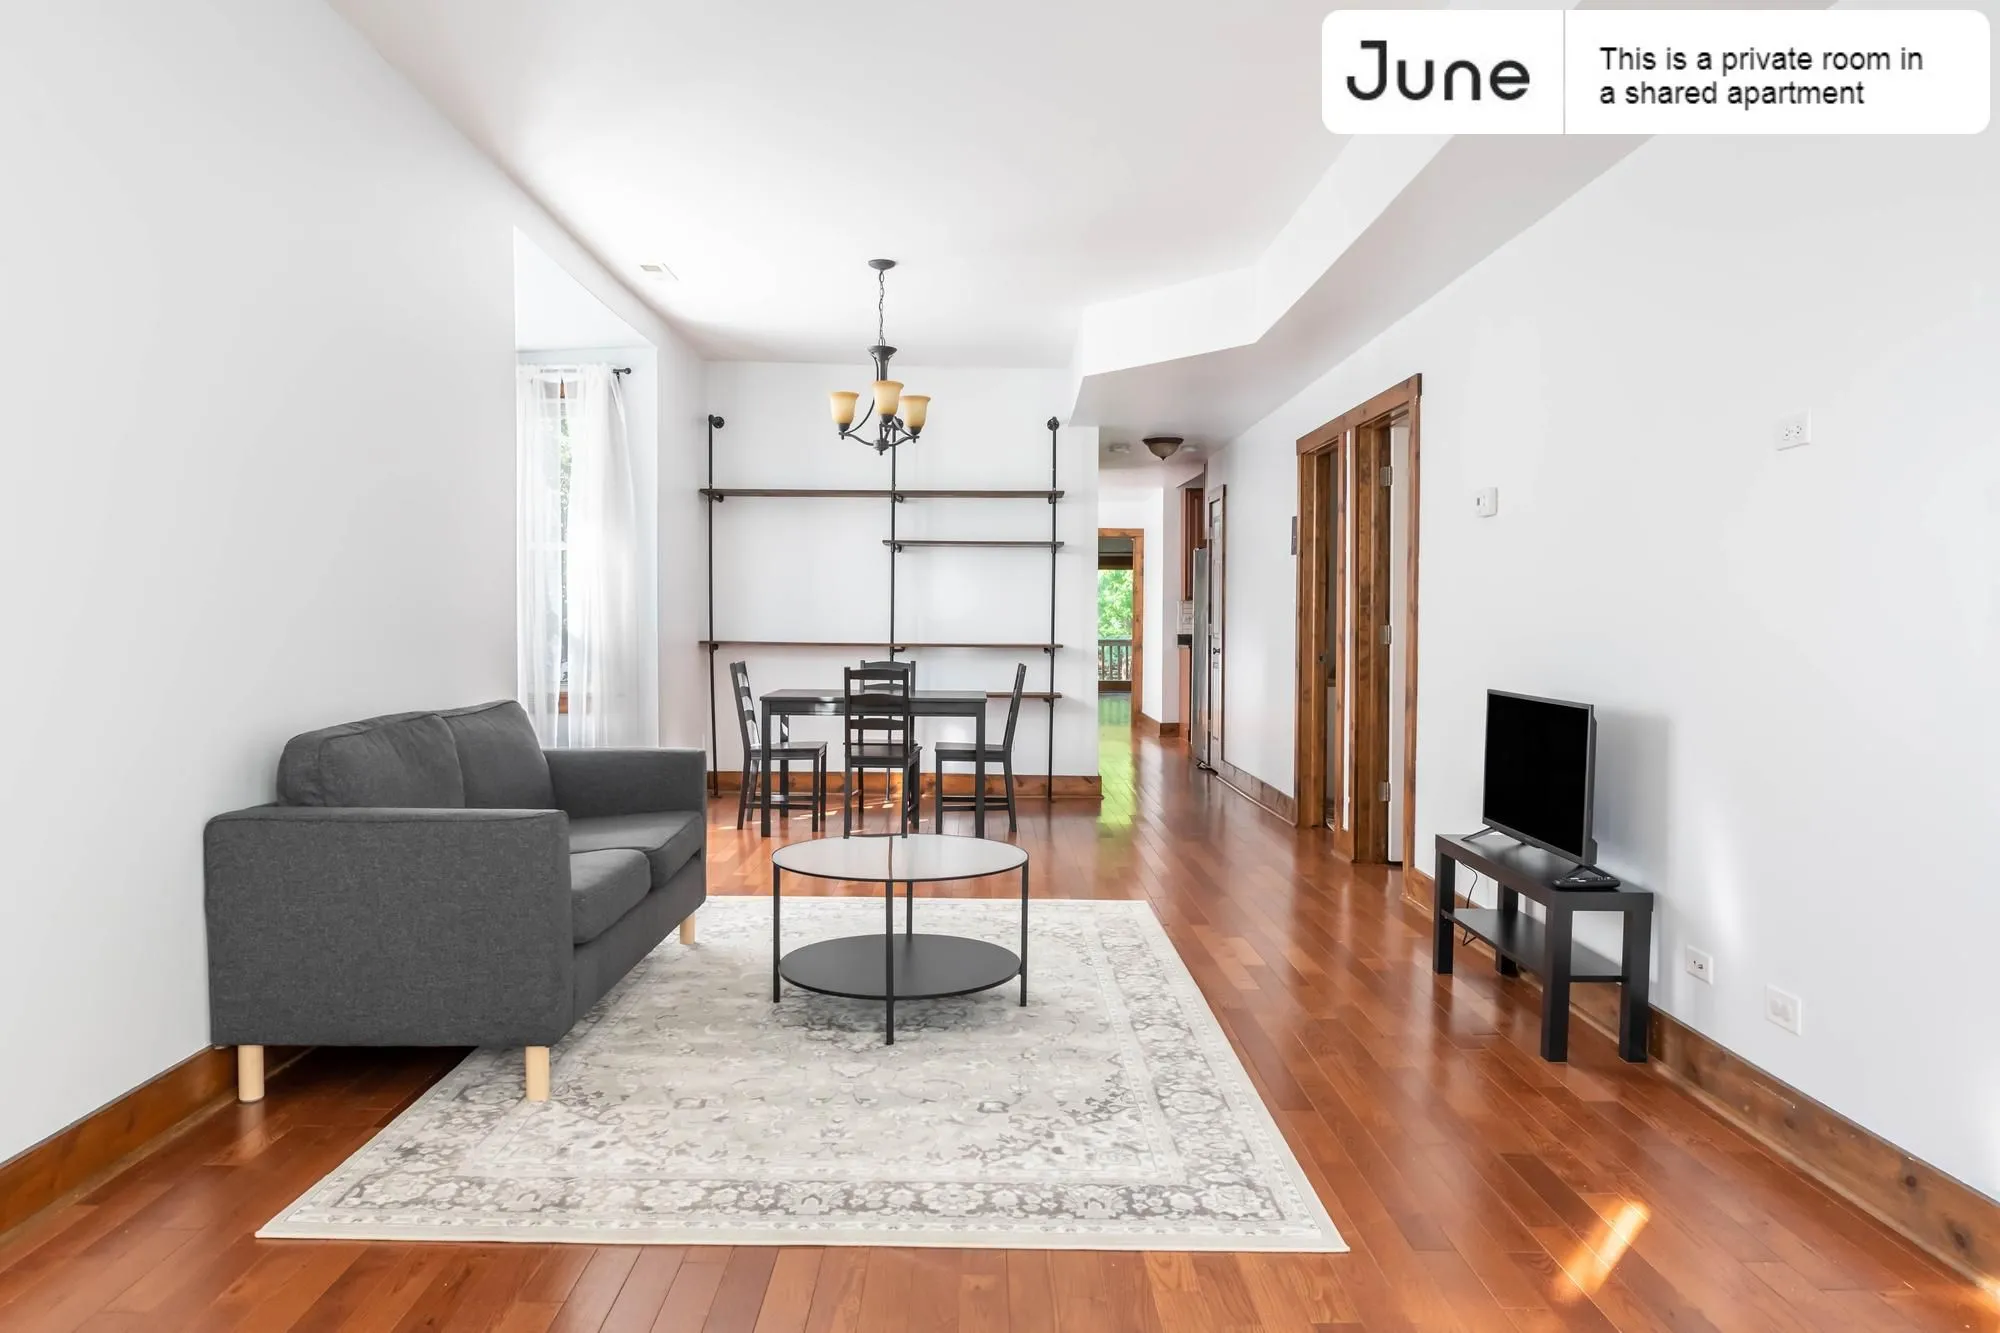 2218 N SAWYER AVE 60647-Room For Rent-unit#01-Chicago-IL